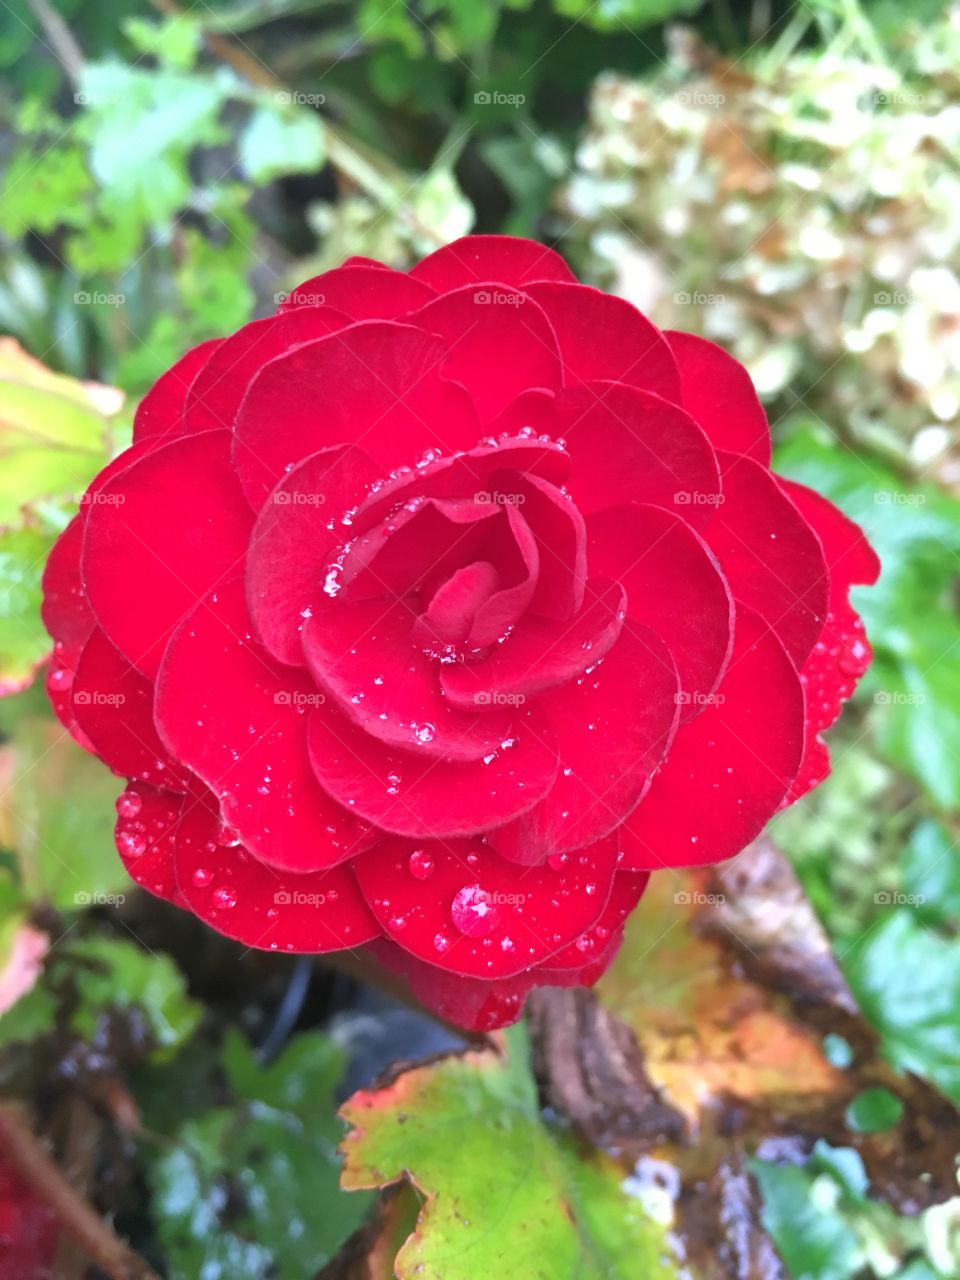 A bright red flower with rain drops.